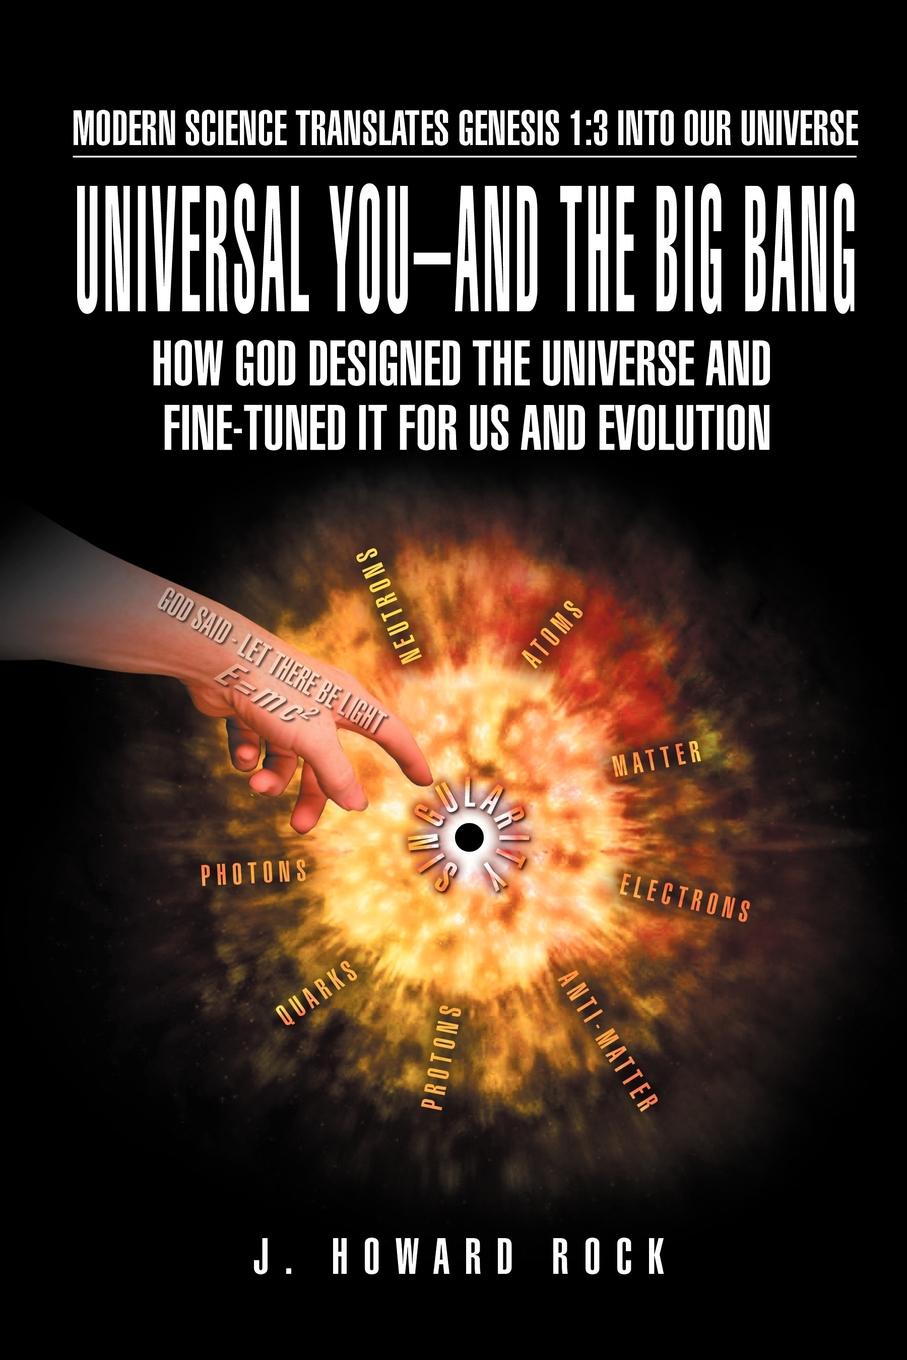 Universal You-And the Big Bang. How God Designed the Universe and Fine-Tuned It for Us and Evolution